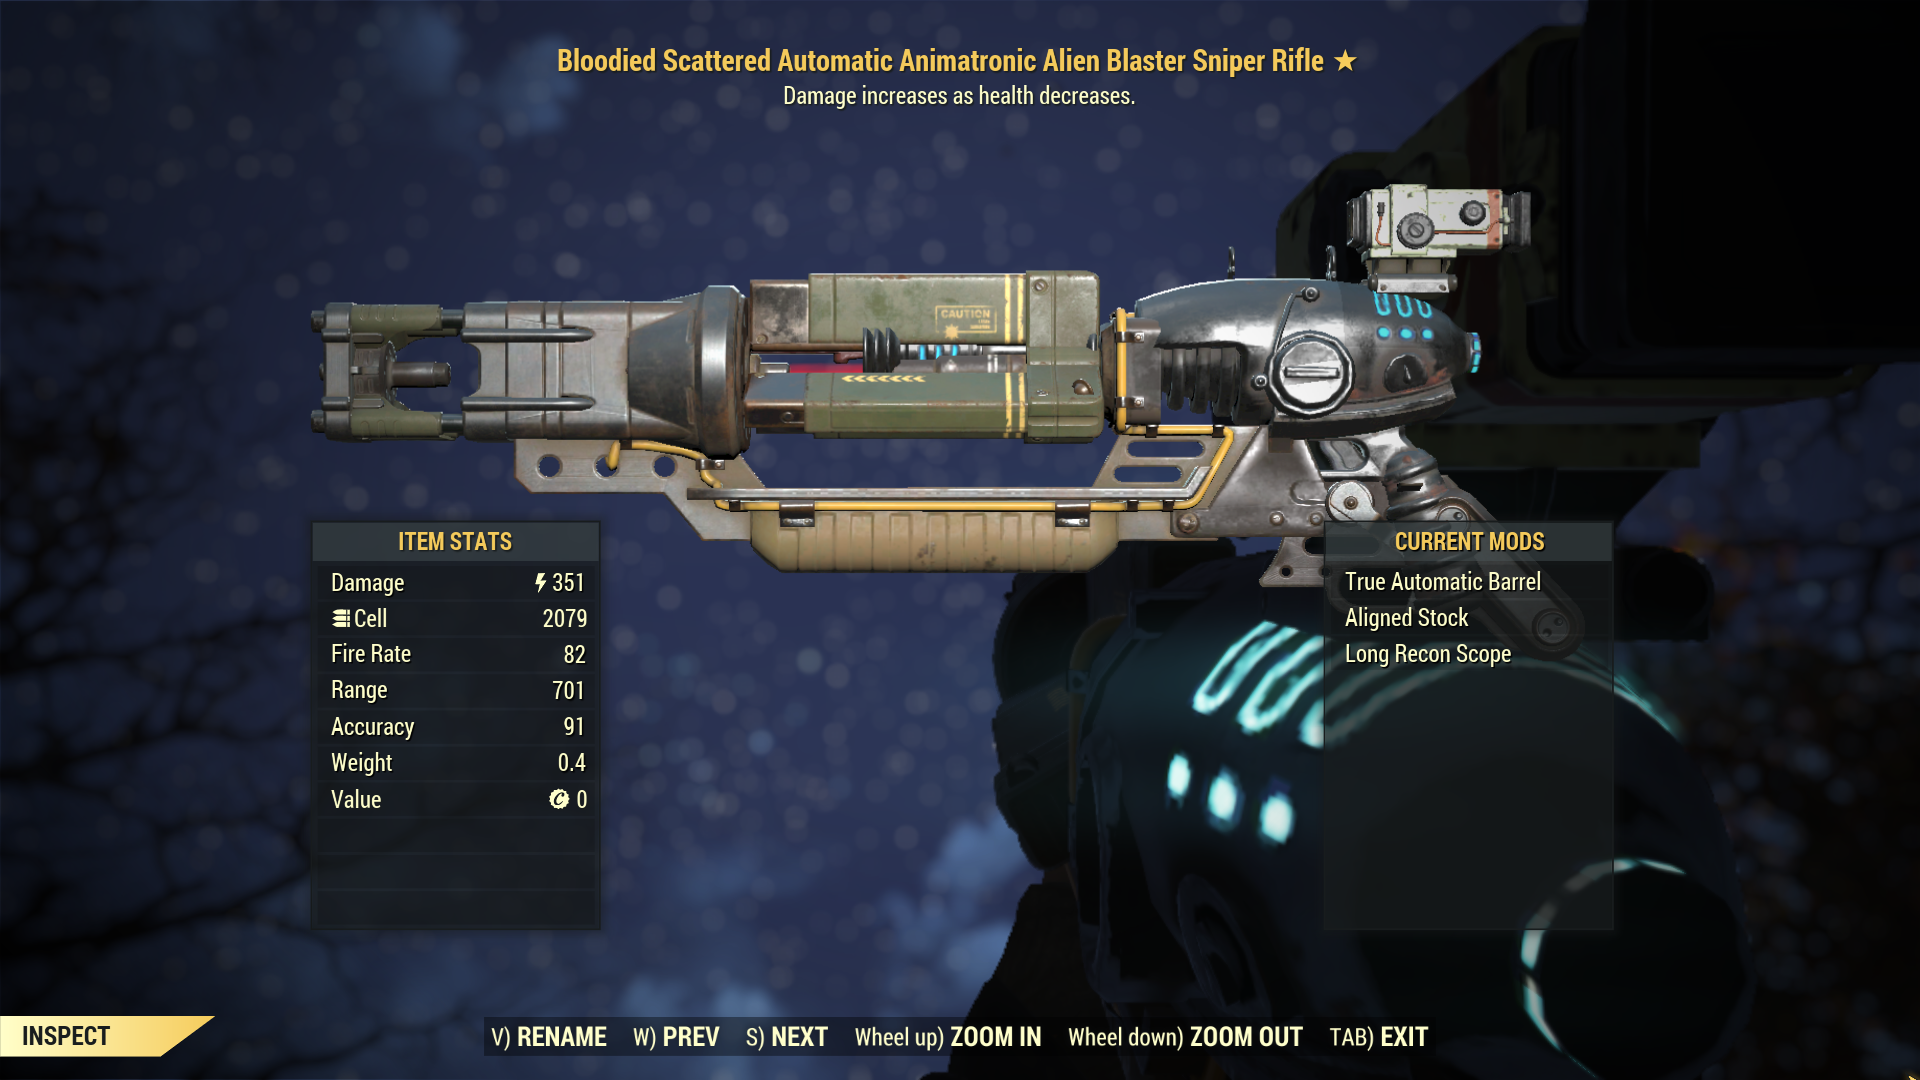 where to get alien blaster fallout 4